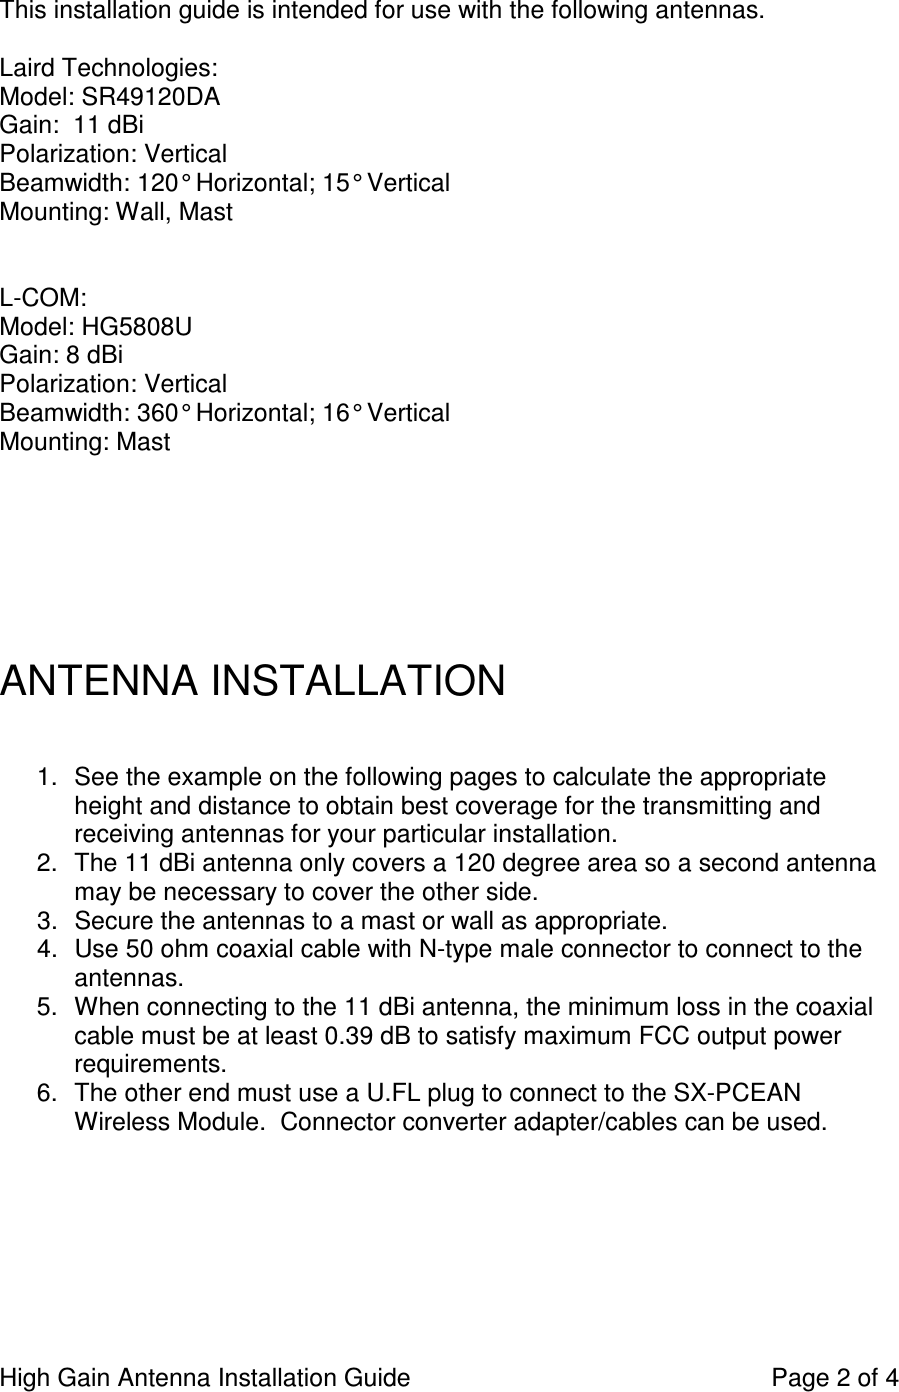 High Gain Antenna Installation Guide    Page 2 of 4  This installation guide is intended for use with the following antennas.  Laird Technologies: Model: SR49120DA Gain:  11 dBi  Polarization: Vertical Beamwidth: 120° Horizontal; 15° Vertical Mounting: Wall, Mast    L-COM: Model: HG5808U Gain: 8 dBi Polarization: Vertical Beamwidth: 360° Horizontal; 16° Vertical Mounting: Mast        ANTENNA INSTALLATION   1.  See the example on the following pages to calculate the appropriate height and distance to obtain best coverage for the transmitting and receiving antennas for your particular installation. 2.  The 11 dBi antenna only covers a 120 degree area so a second antenna may be necessary to cover the other side. 3.  Secure the antennas to a mast or wall as appropriate. 4.  Use 50 ohm coaxial cable with N-type male connector to connect to the antennas.   5.  When connecting to the 11 dBi antenna, the minimum loss in the coaxial cable must be at least 0.39 dB to satisfy maximum FCC output power requirements. 6.  The other end must use a U.FL plug to connect to the SX-PCEAN Wireless Module.  Connector converter adapter/cables can be used.       